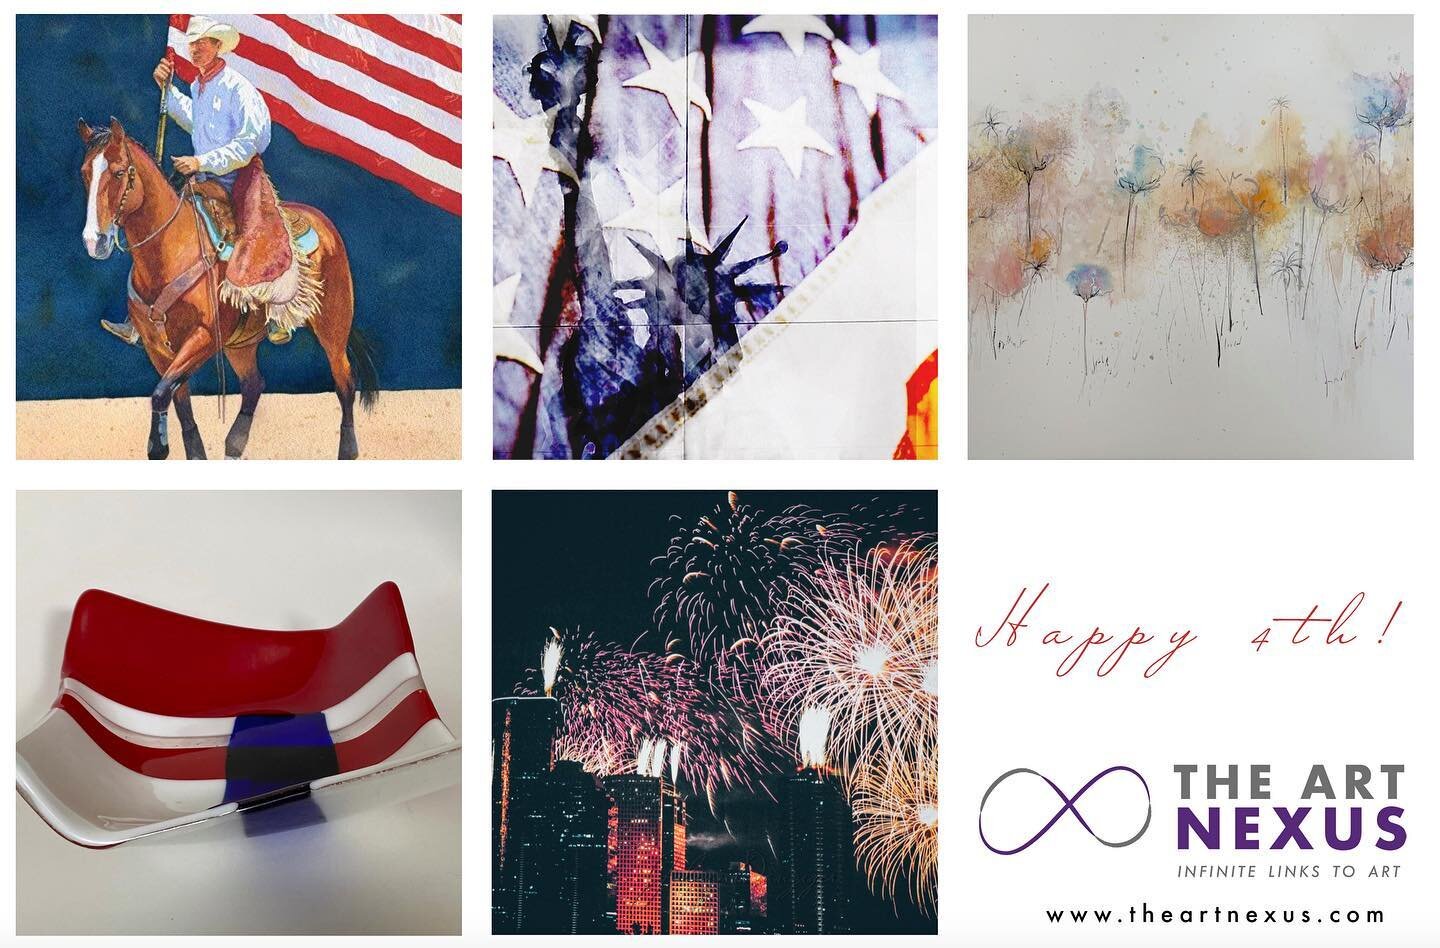 Happy 4th! Find out more about these #july4th inspired artworks at www.theartnexus.com/latest/happy-july-4th #fireworks